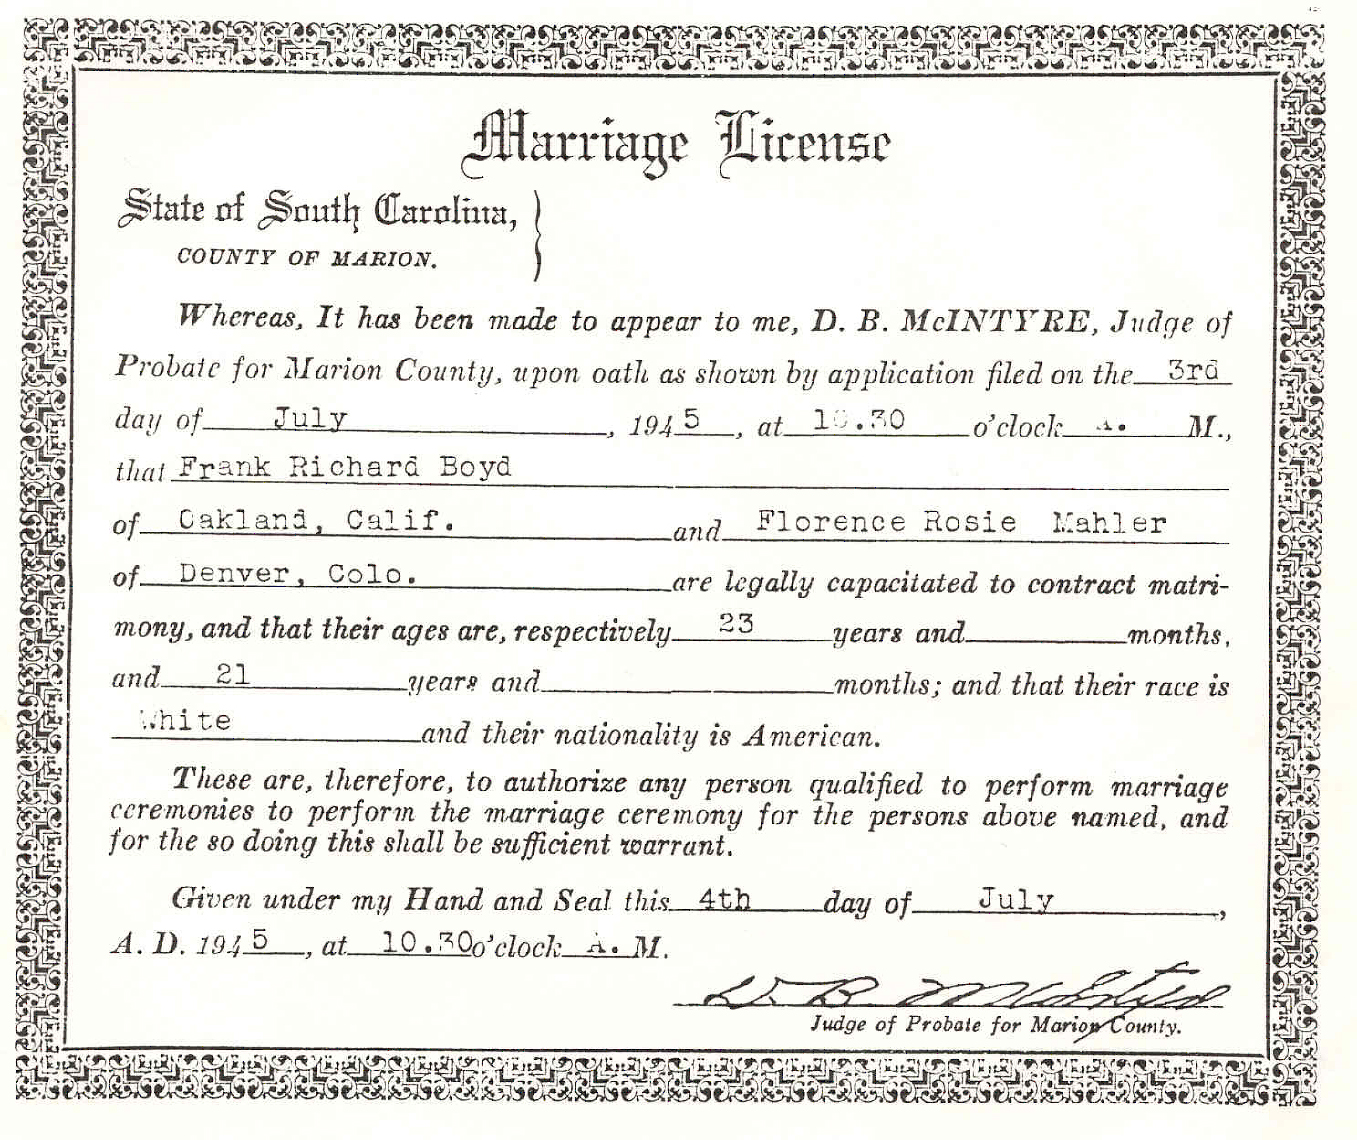 Marriage license of Frank Richard Boyd and Florence Rosie Mahler